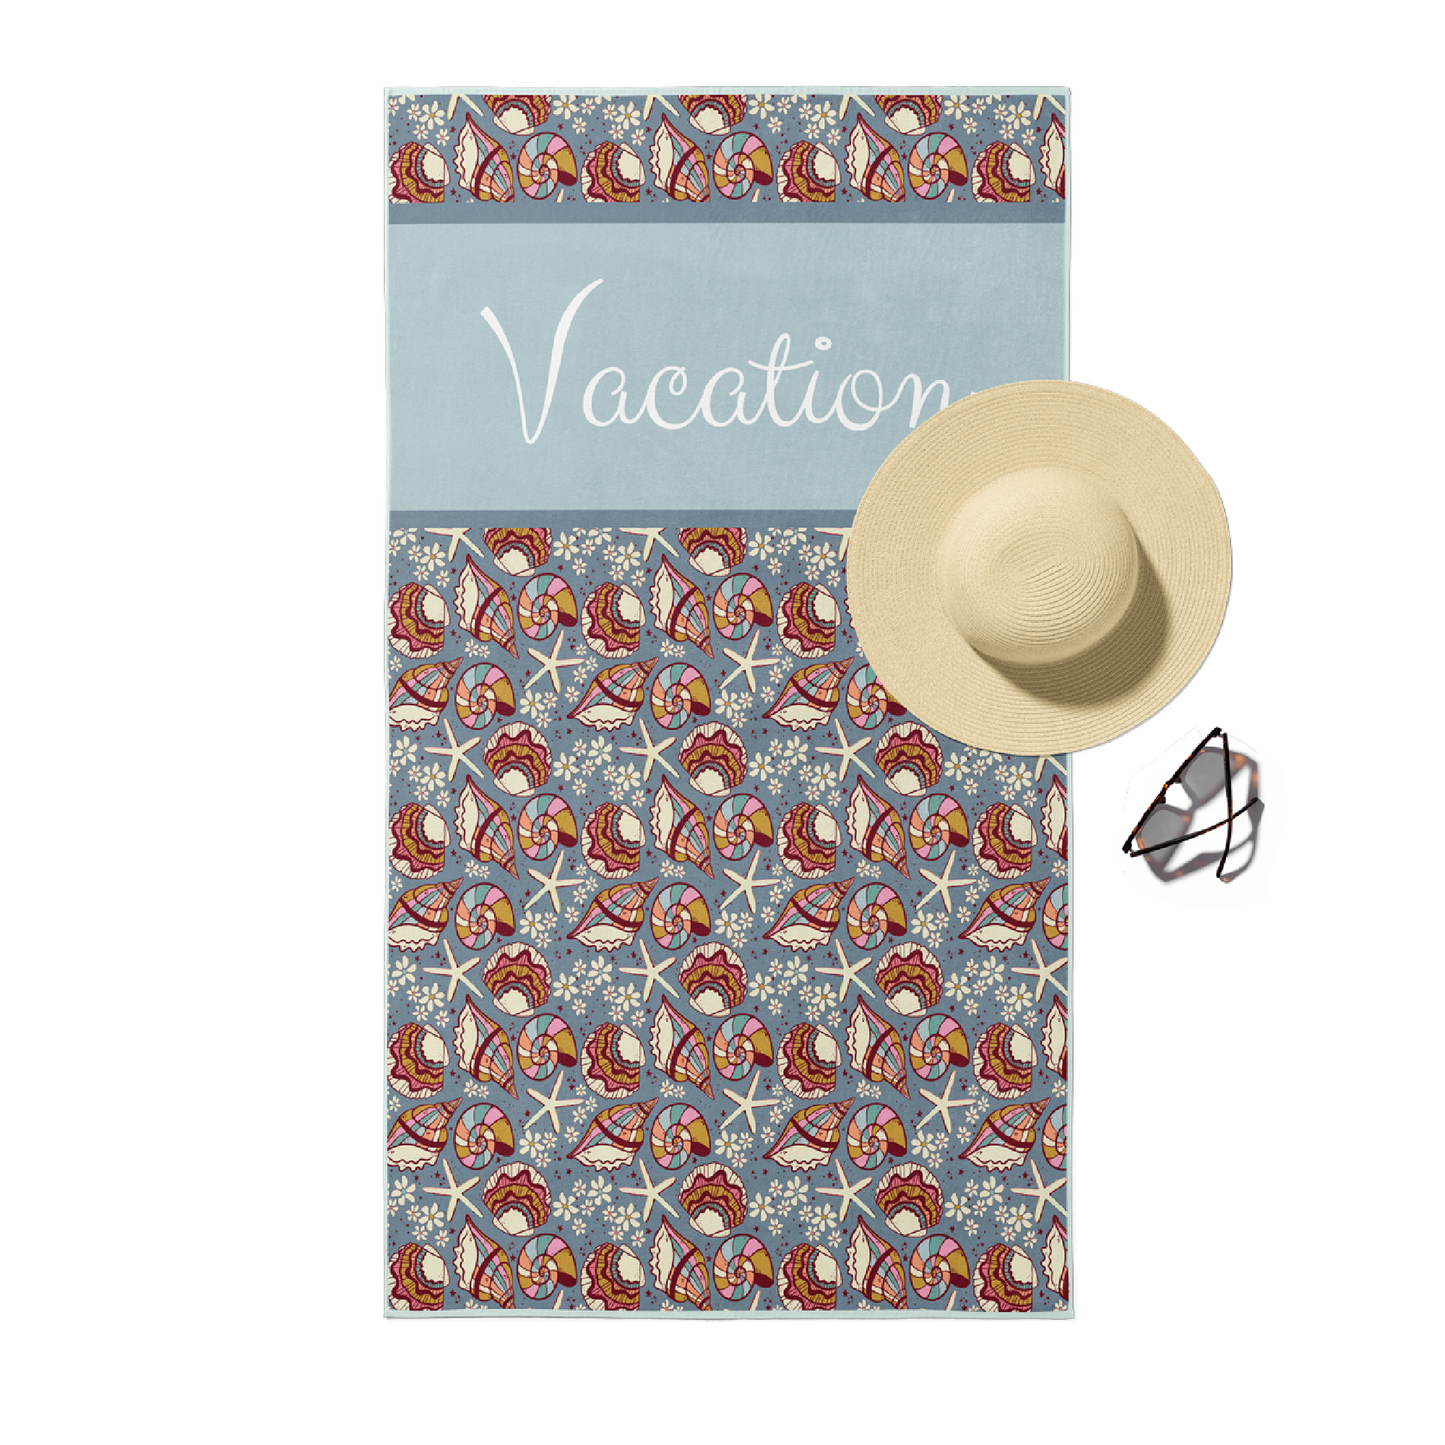 Beach towel in vintage sea shell and daisy floral pattern with customizable text.